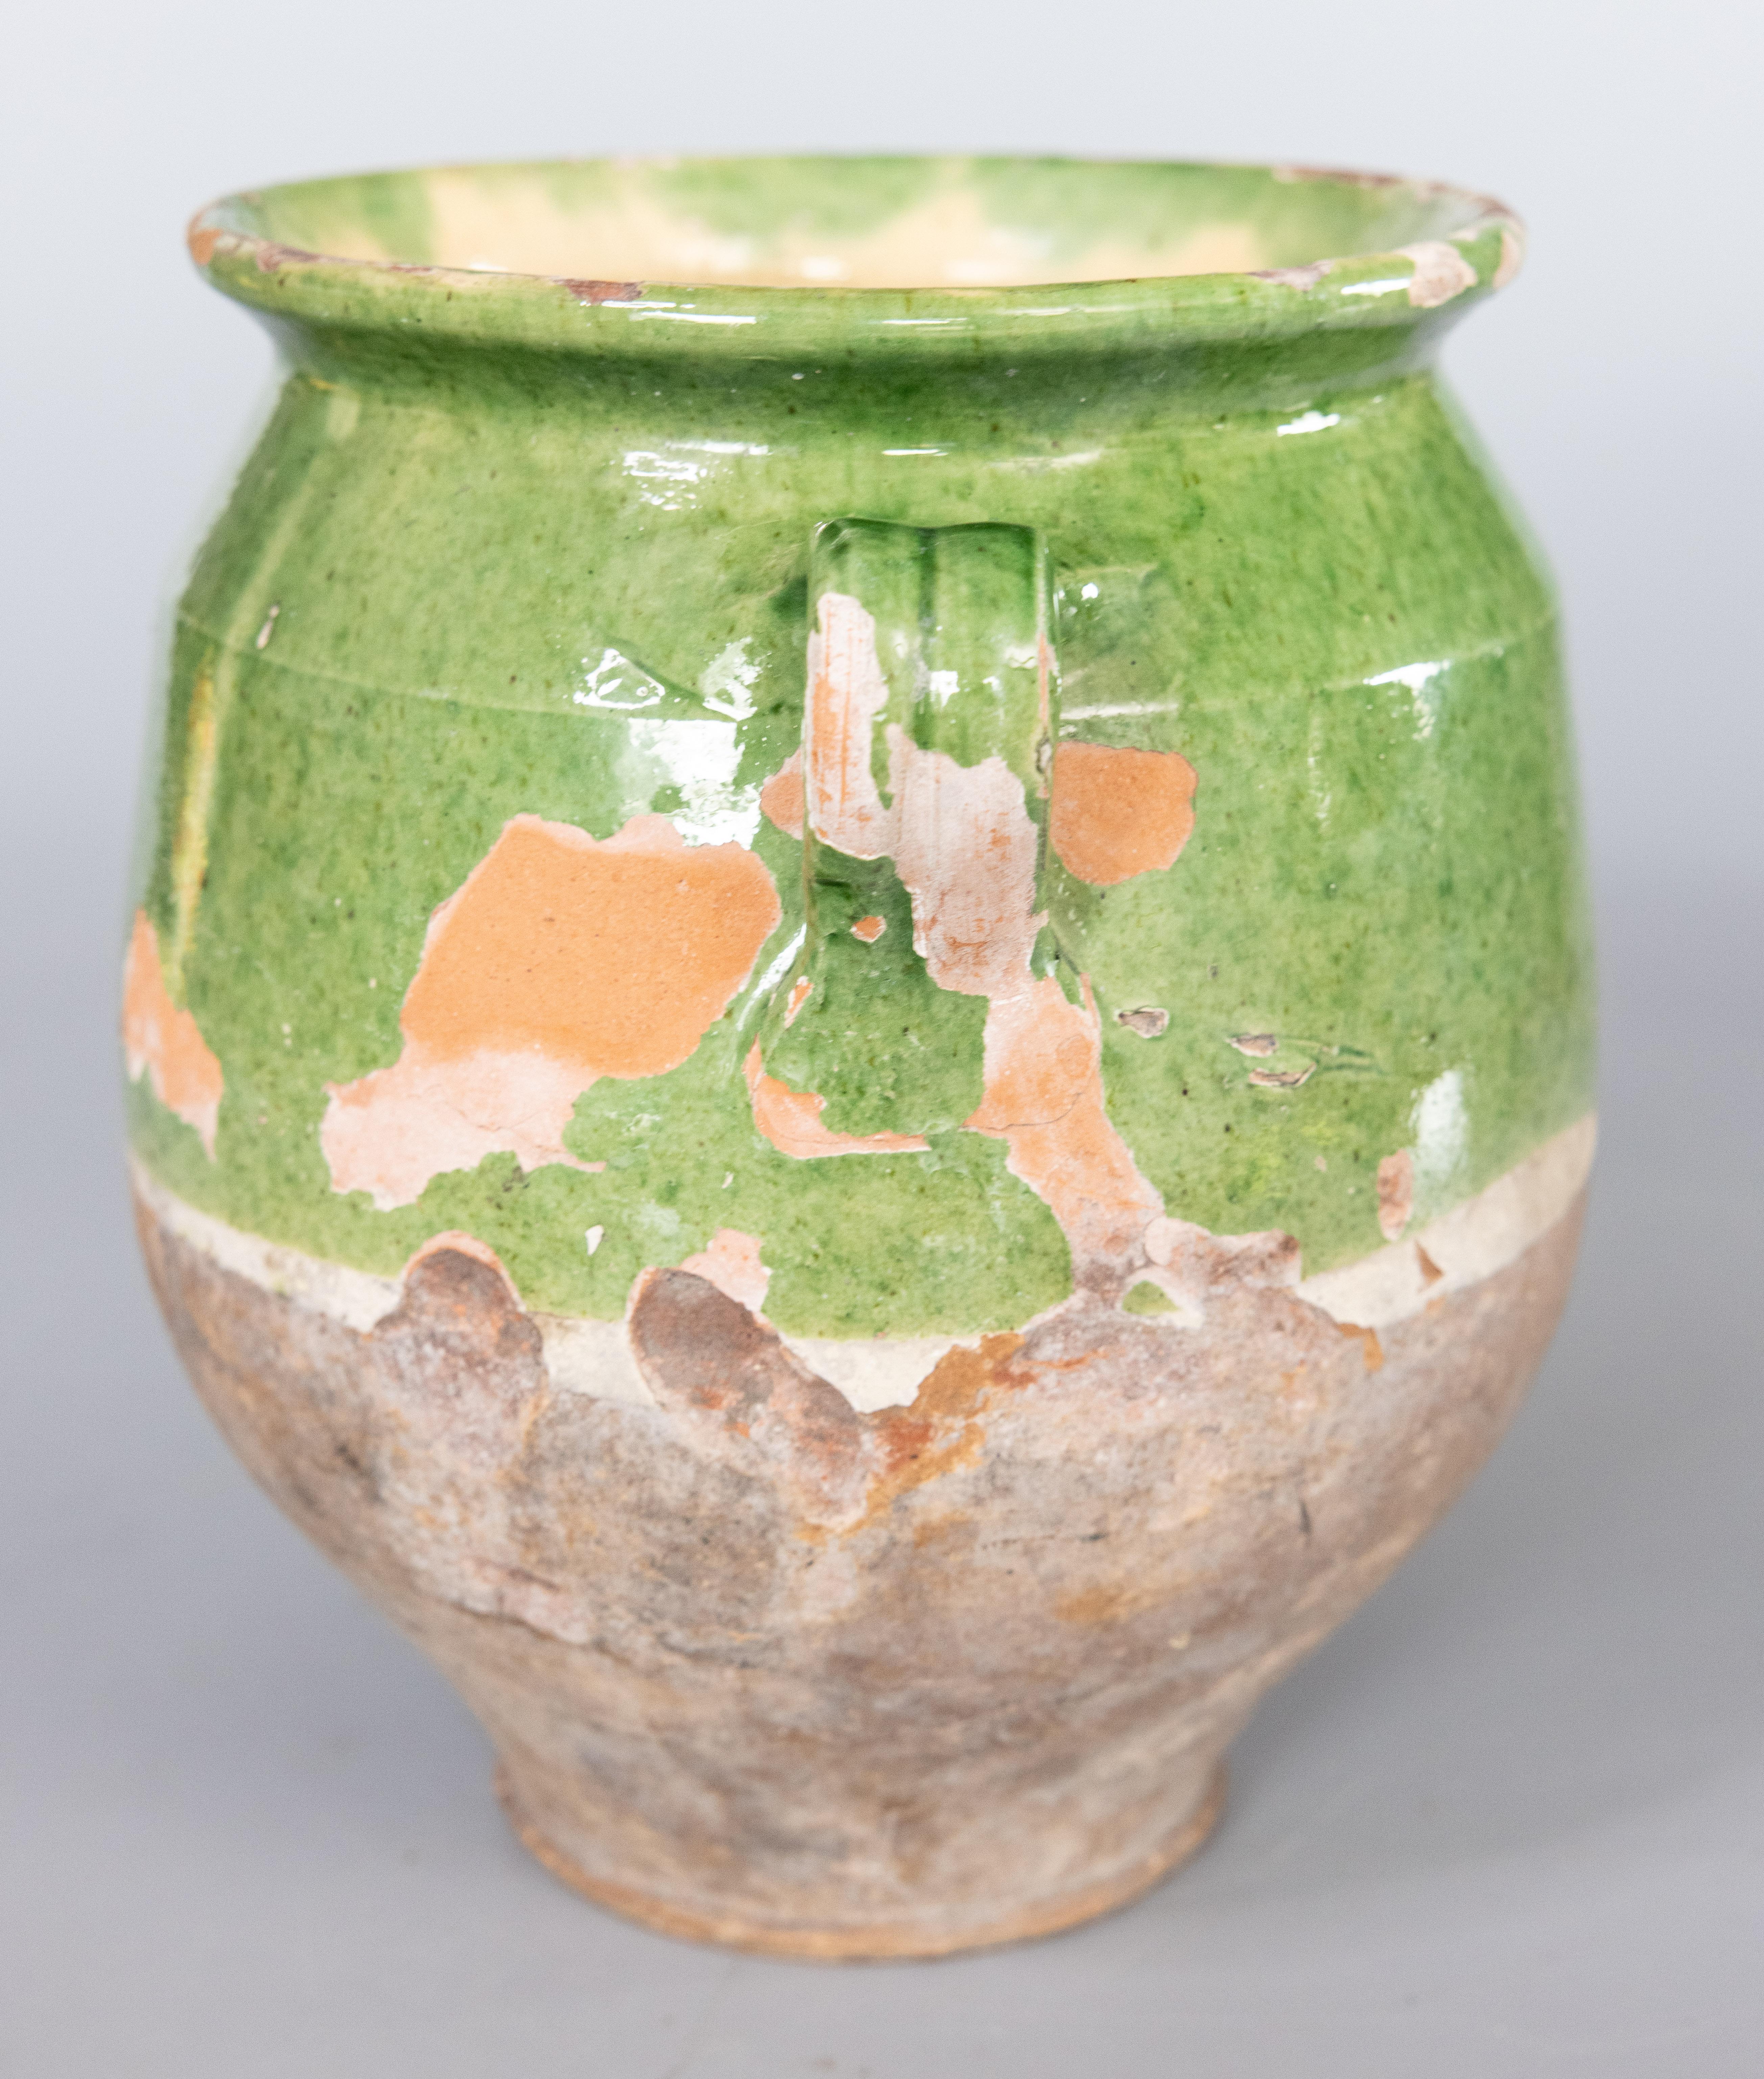 Antique 19th century French confit pot with green glaze from the South of France, Castelnaudary. This pot or planter is hand thrown with charming handles known as 'ears'. These jars were used for storing and preserving cooked meat. It displays